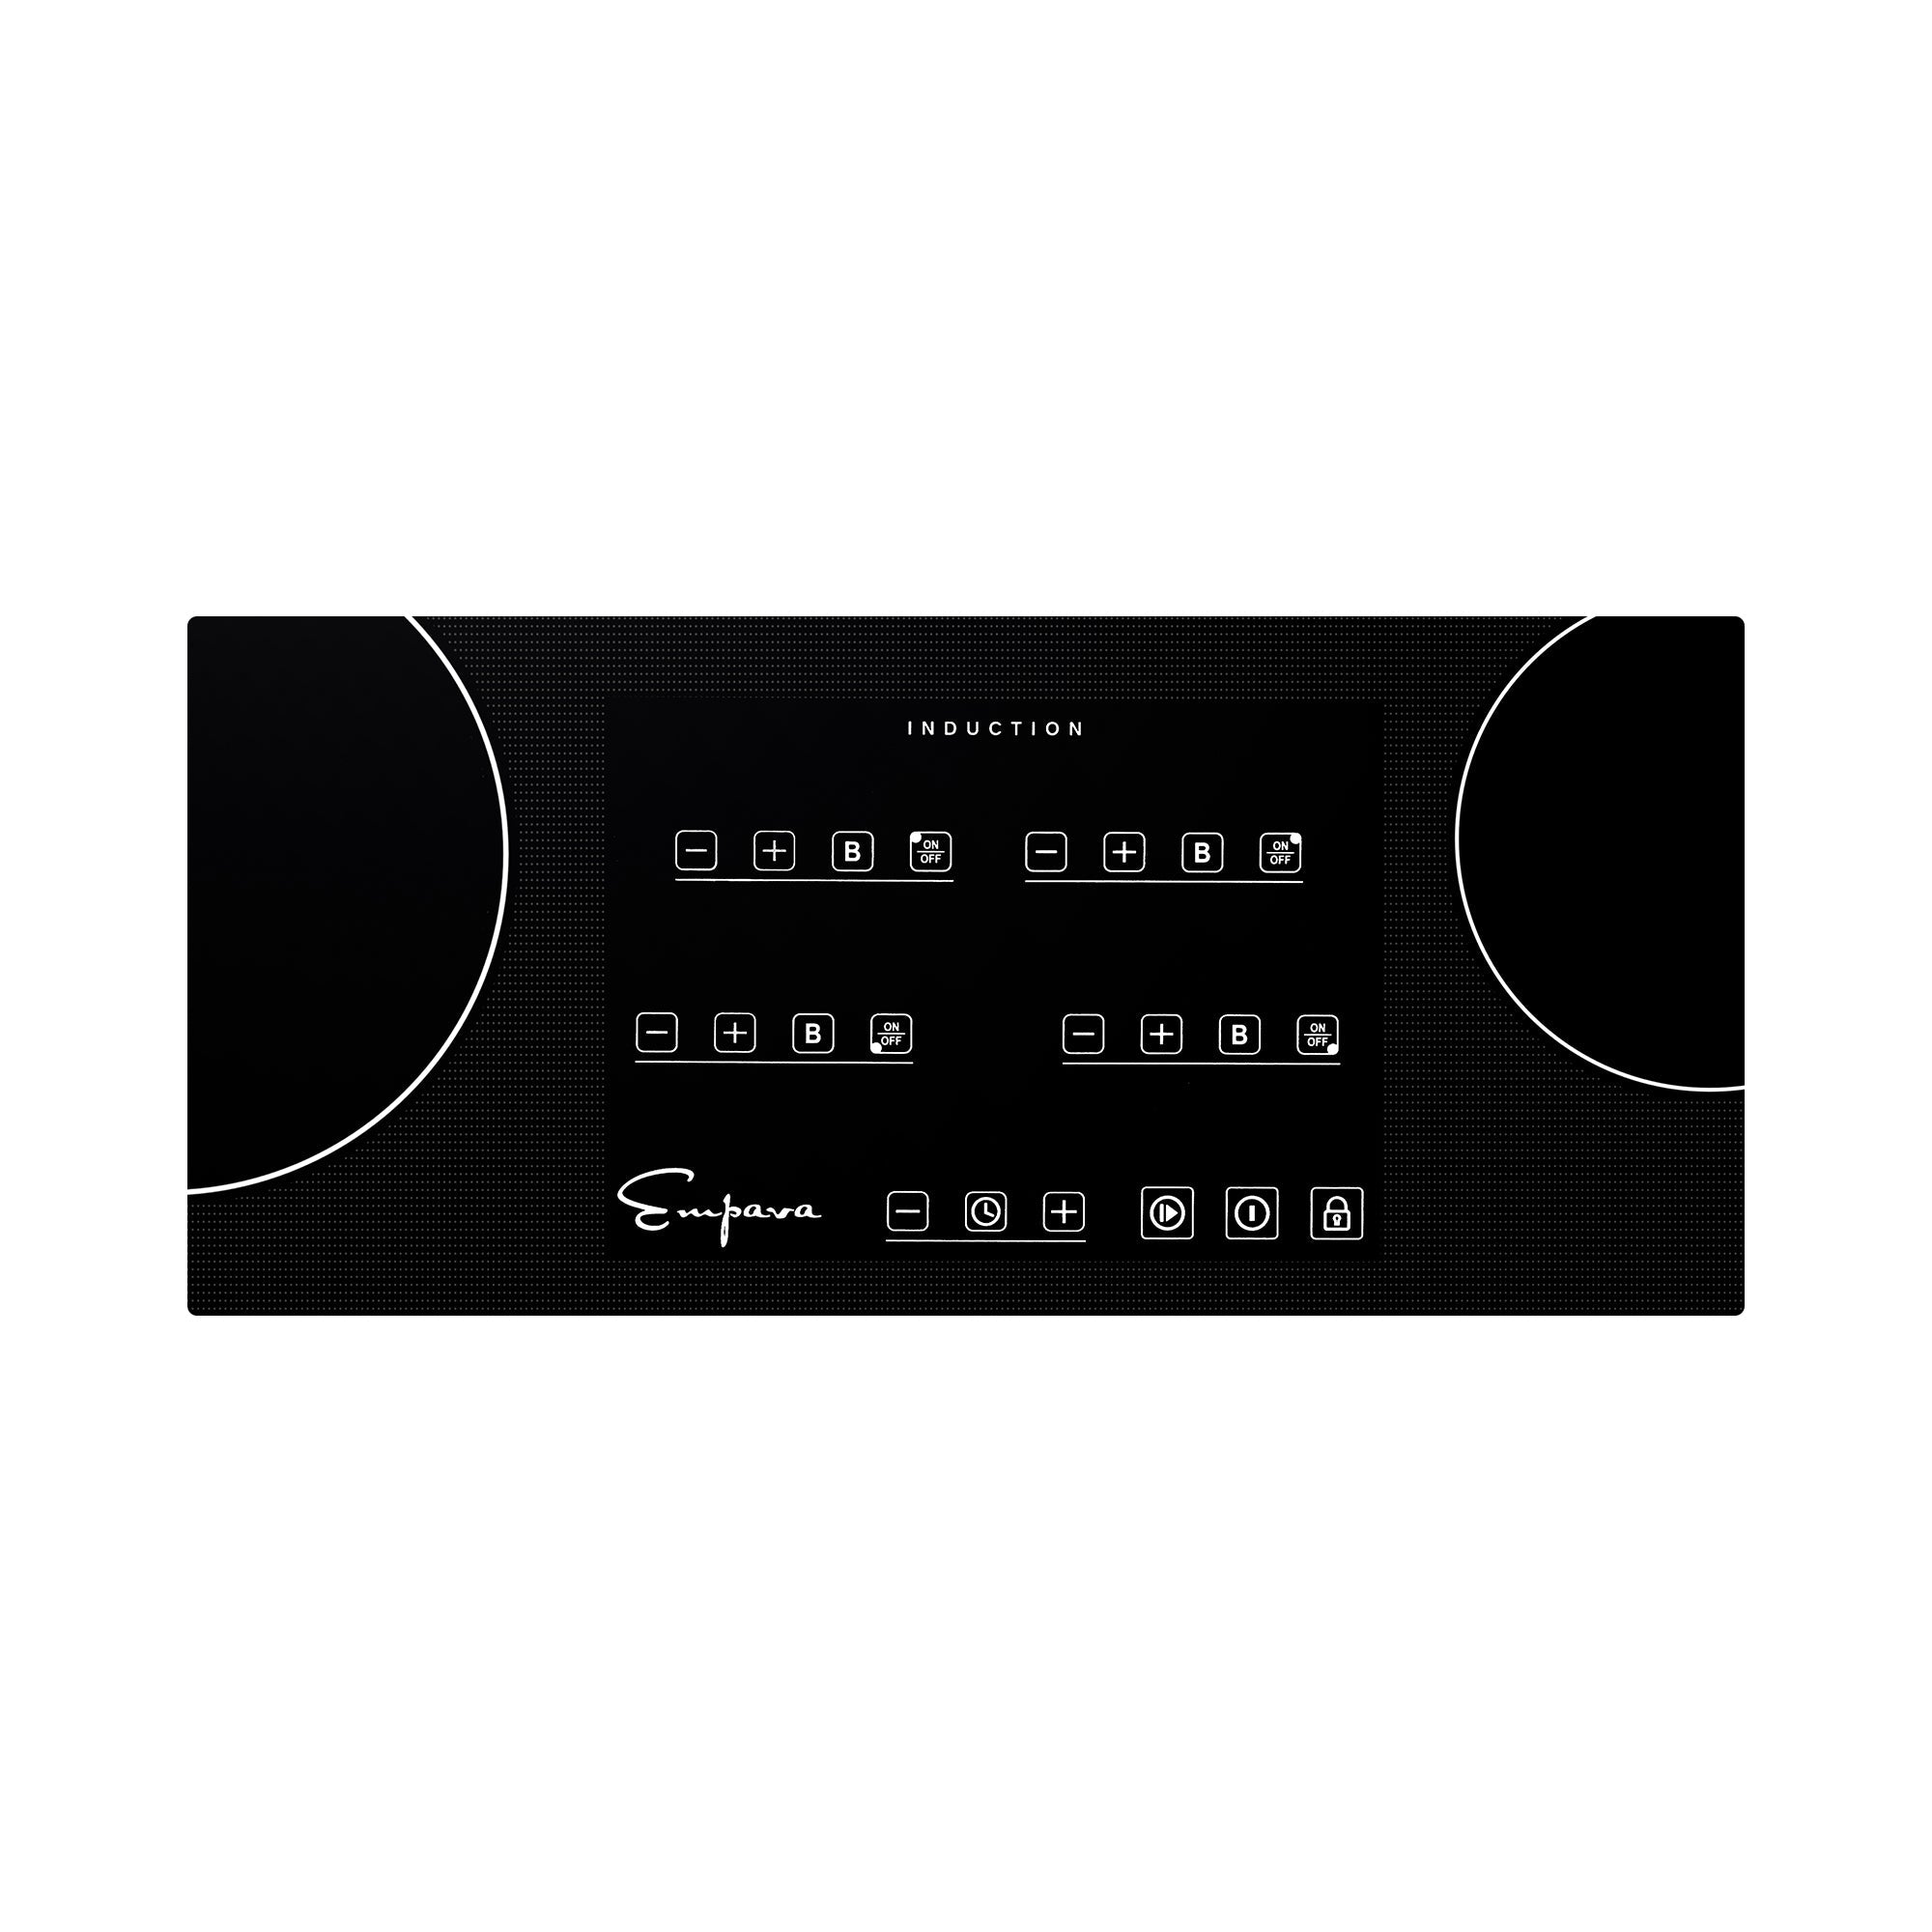 Empava 30 Inch Induction Cooktop